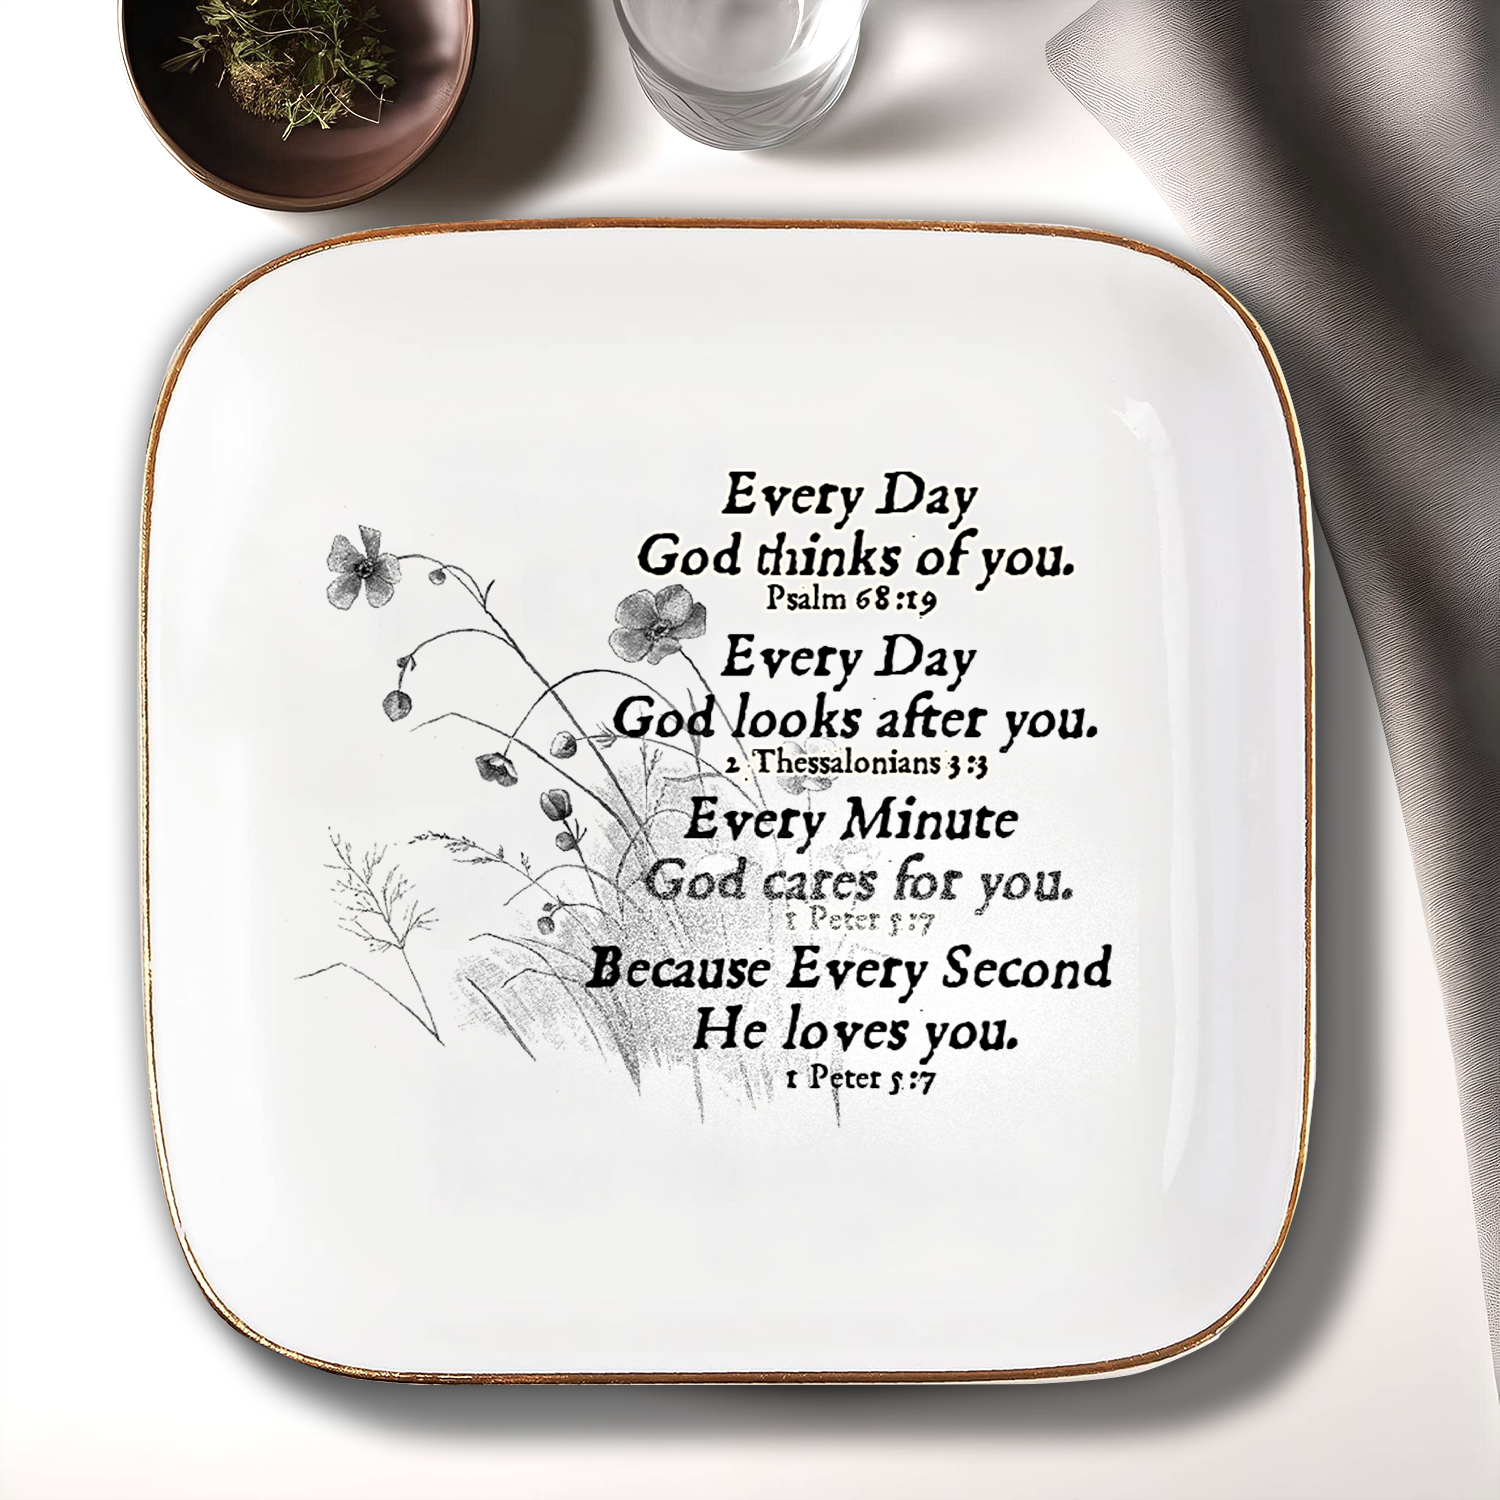 Every Second He Loves You Ceramic Ring Dish Jewelry Dish Birthday Gifts Inspirational Gifts For Women Men